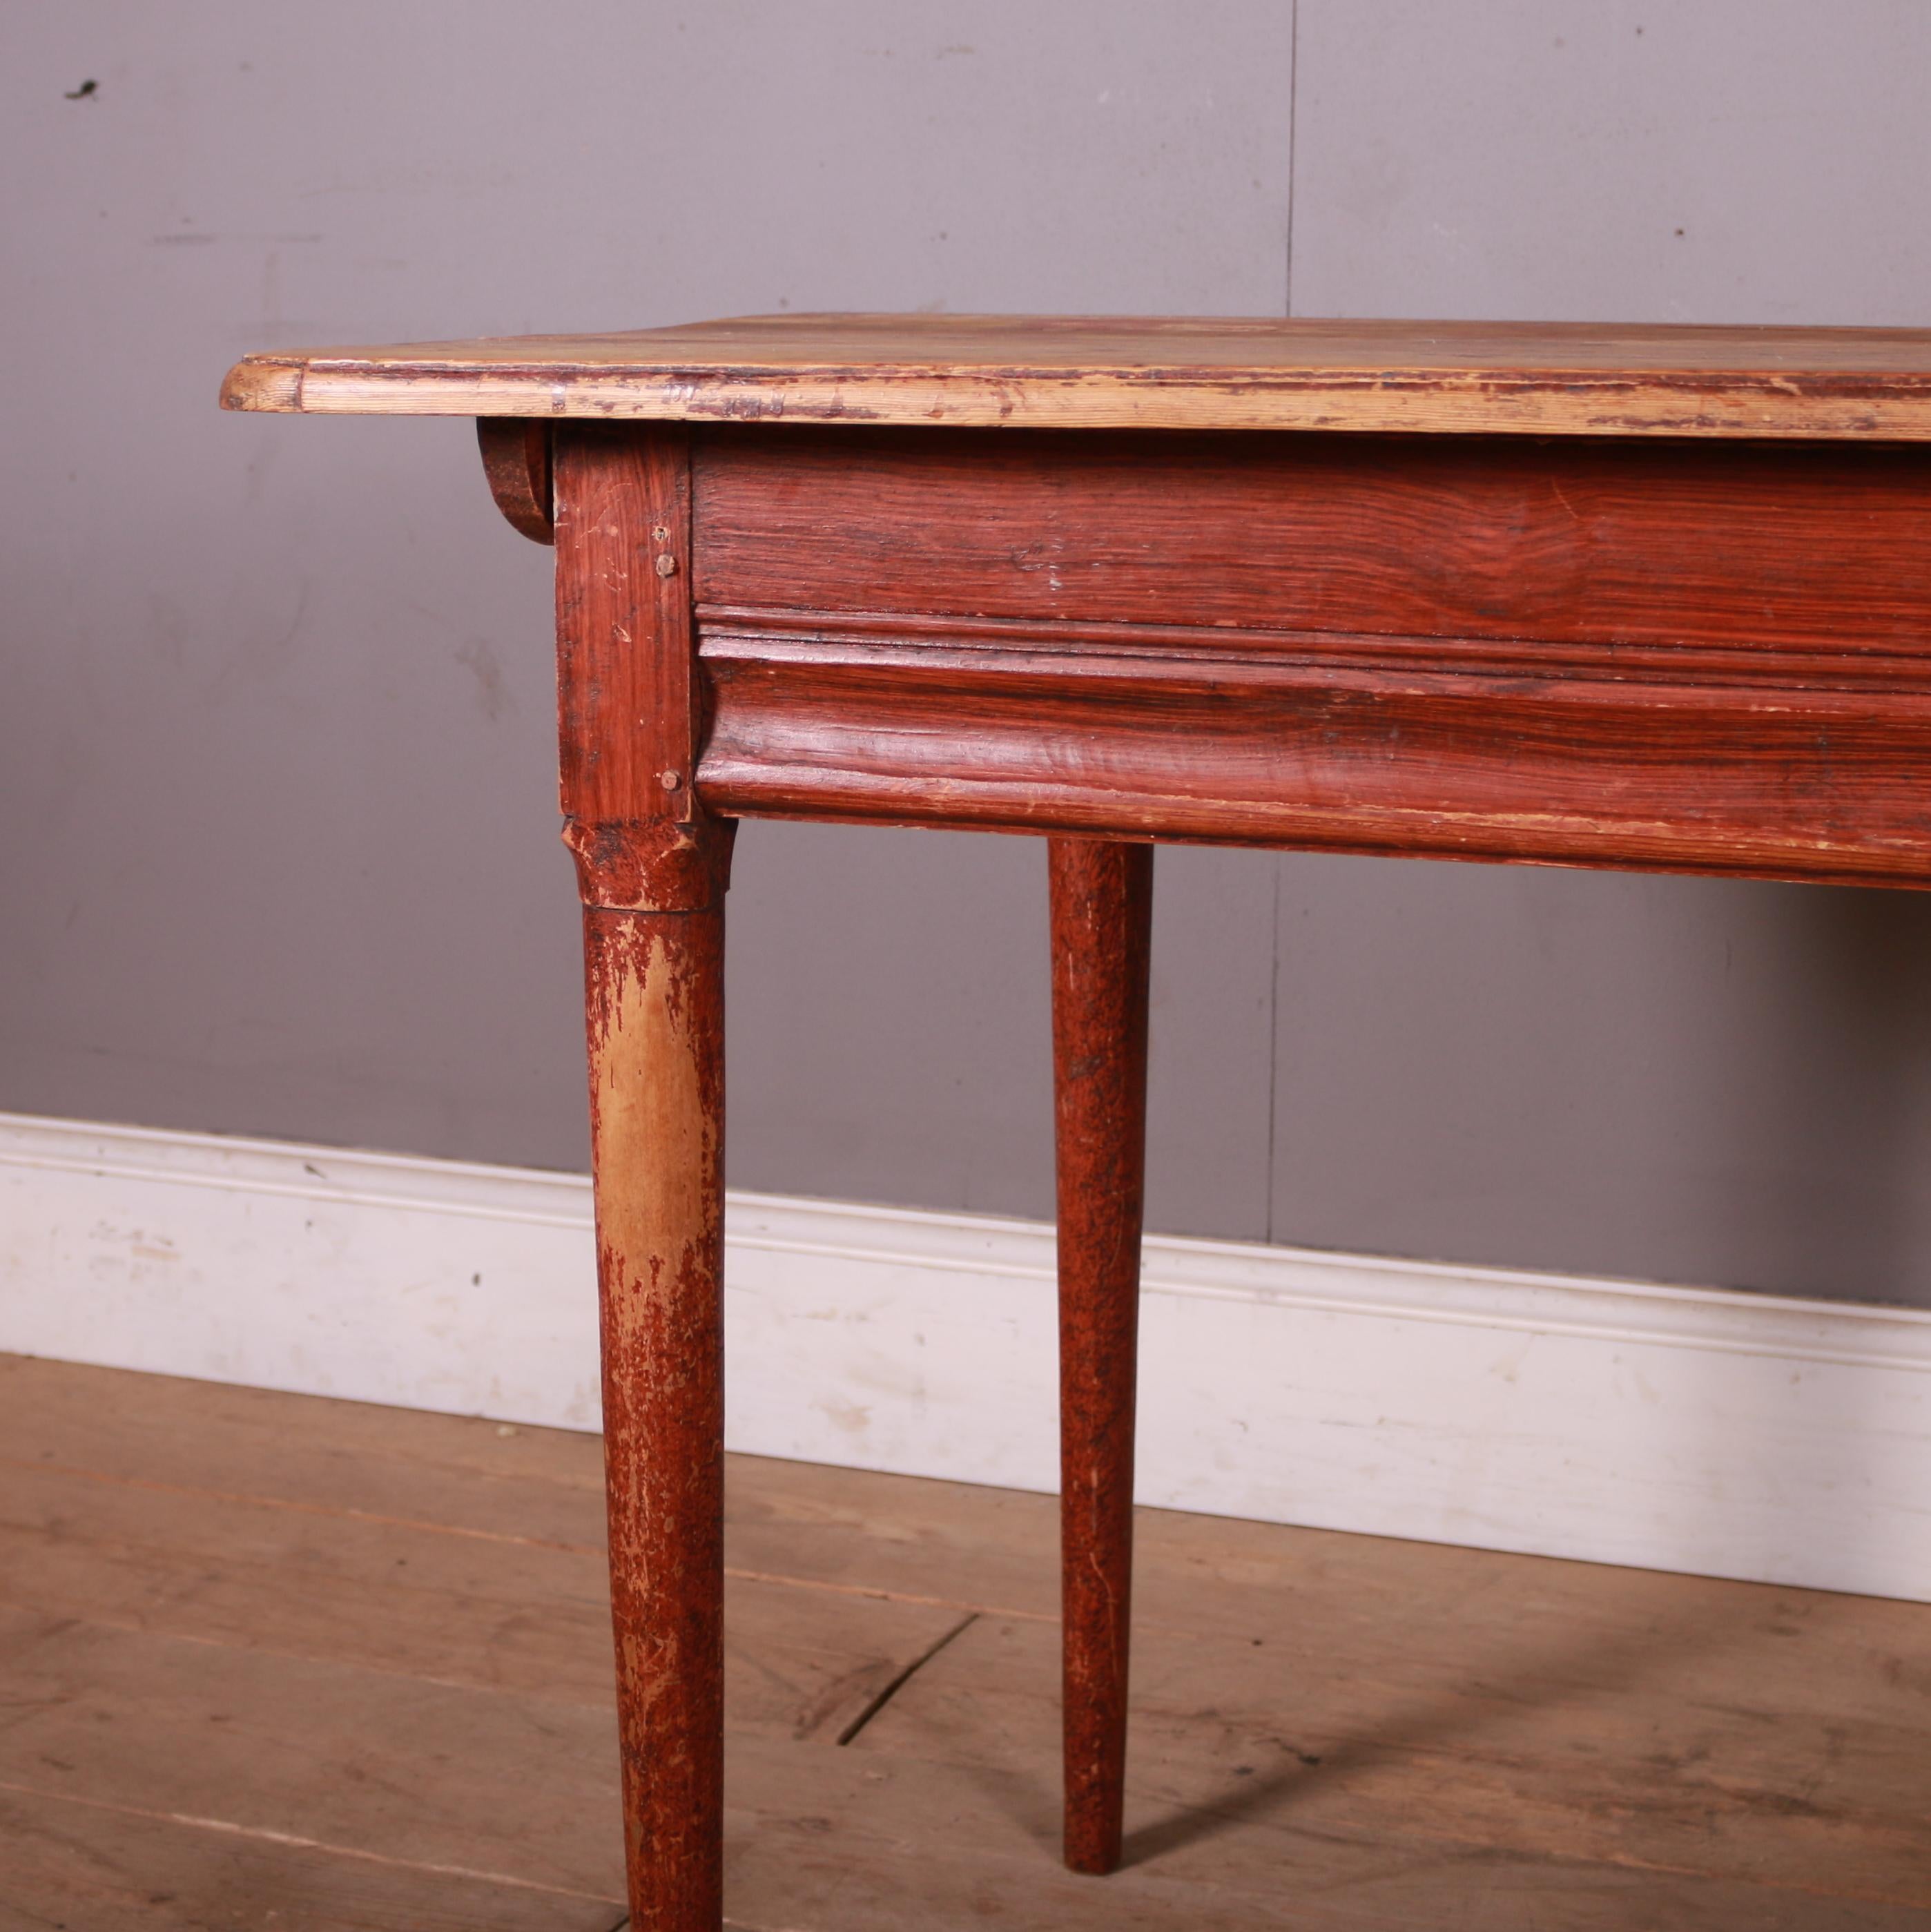 Good 19th C Swedish pine side table with original paint finish. 1840.

Reference: 7323

Dimensions
50 inches (127 cms) Wide
24 inches (61 cms) Deep
30 inches (76 cms) High.